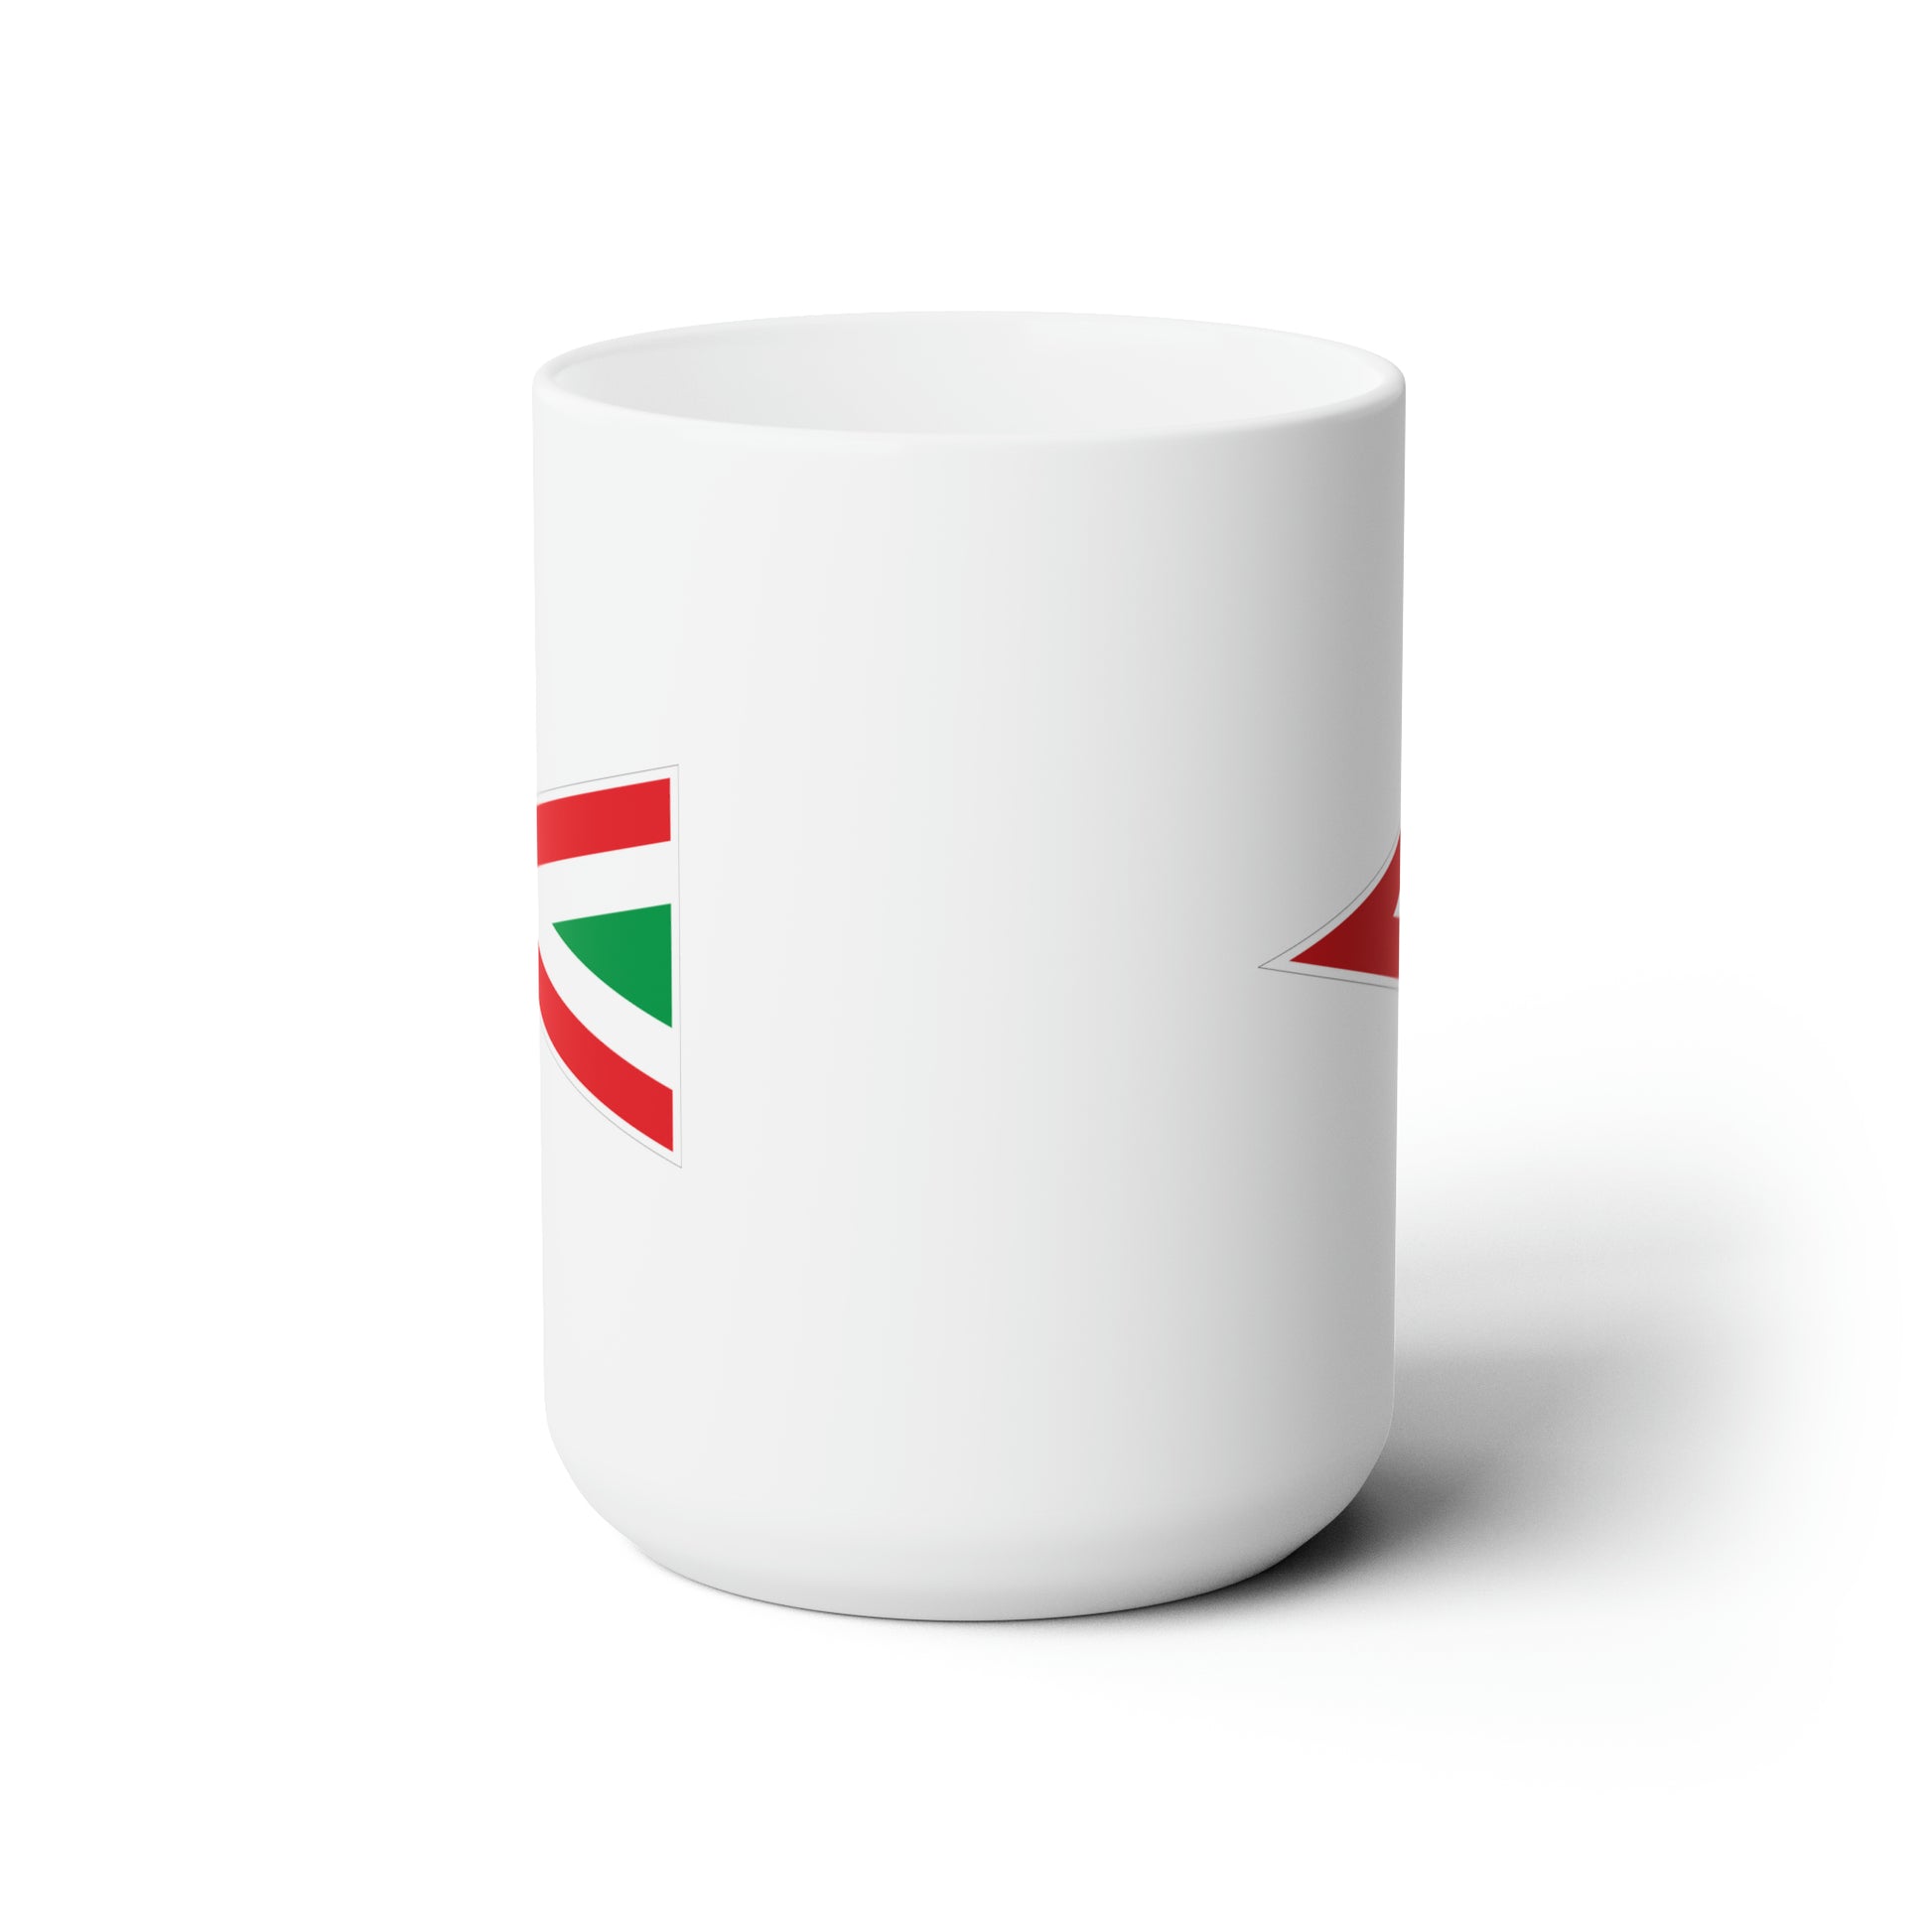 Hungarian Air Force Roundel Coffee Mug - Double Sided White Ceramic 15oz - by TheGlassyLass.com